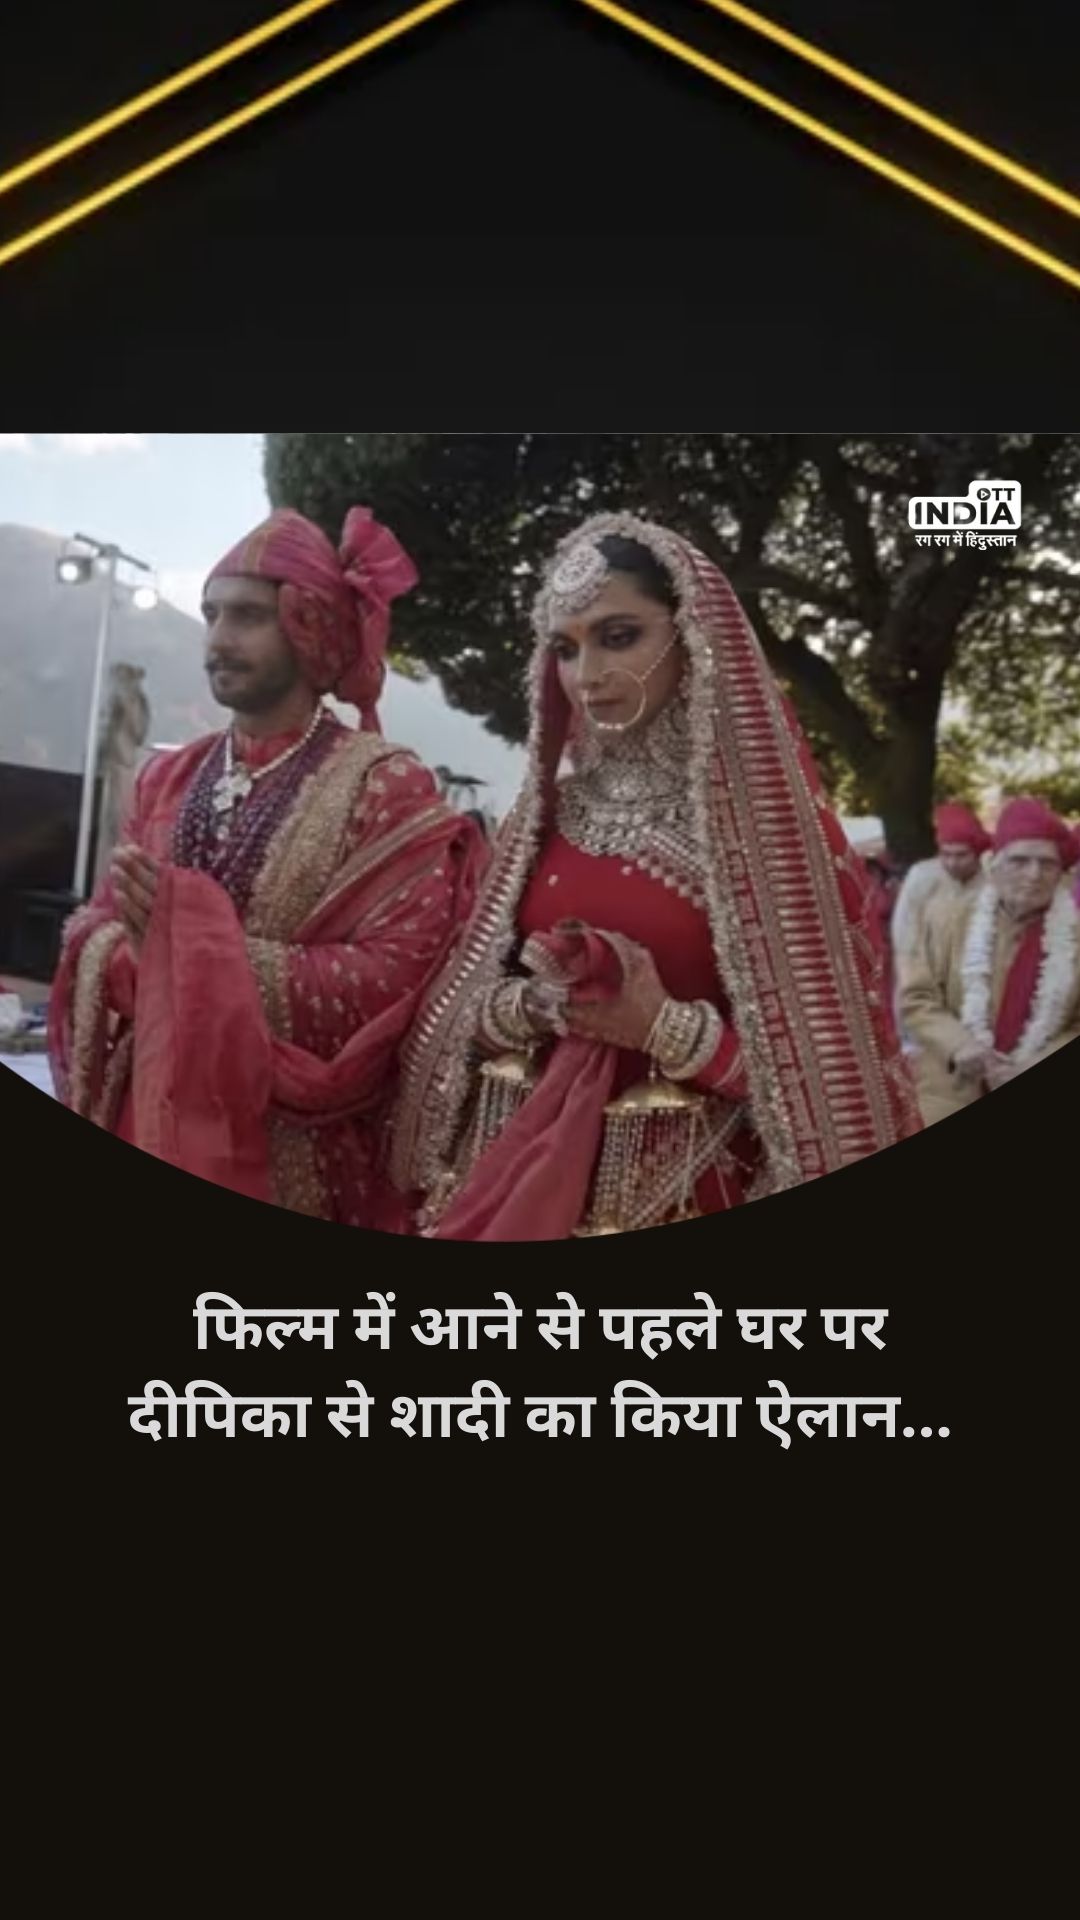 Deepika Ranveer Wedding Video: Before coming to the film, announced marriage with Deepika at home...